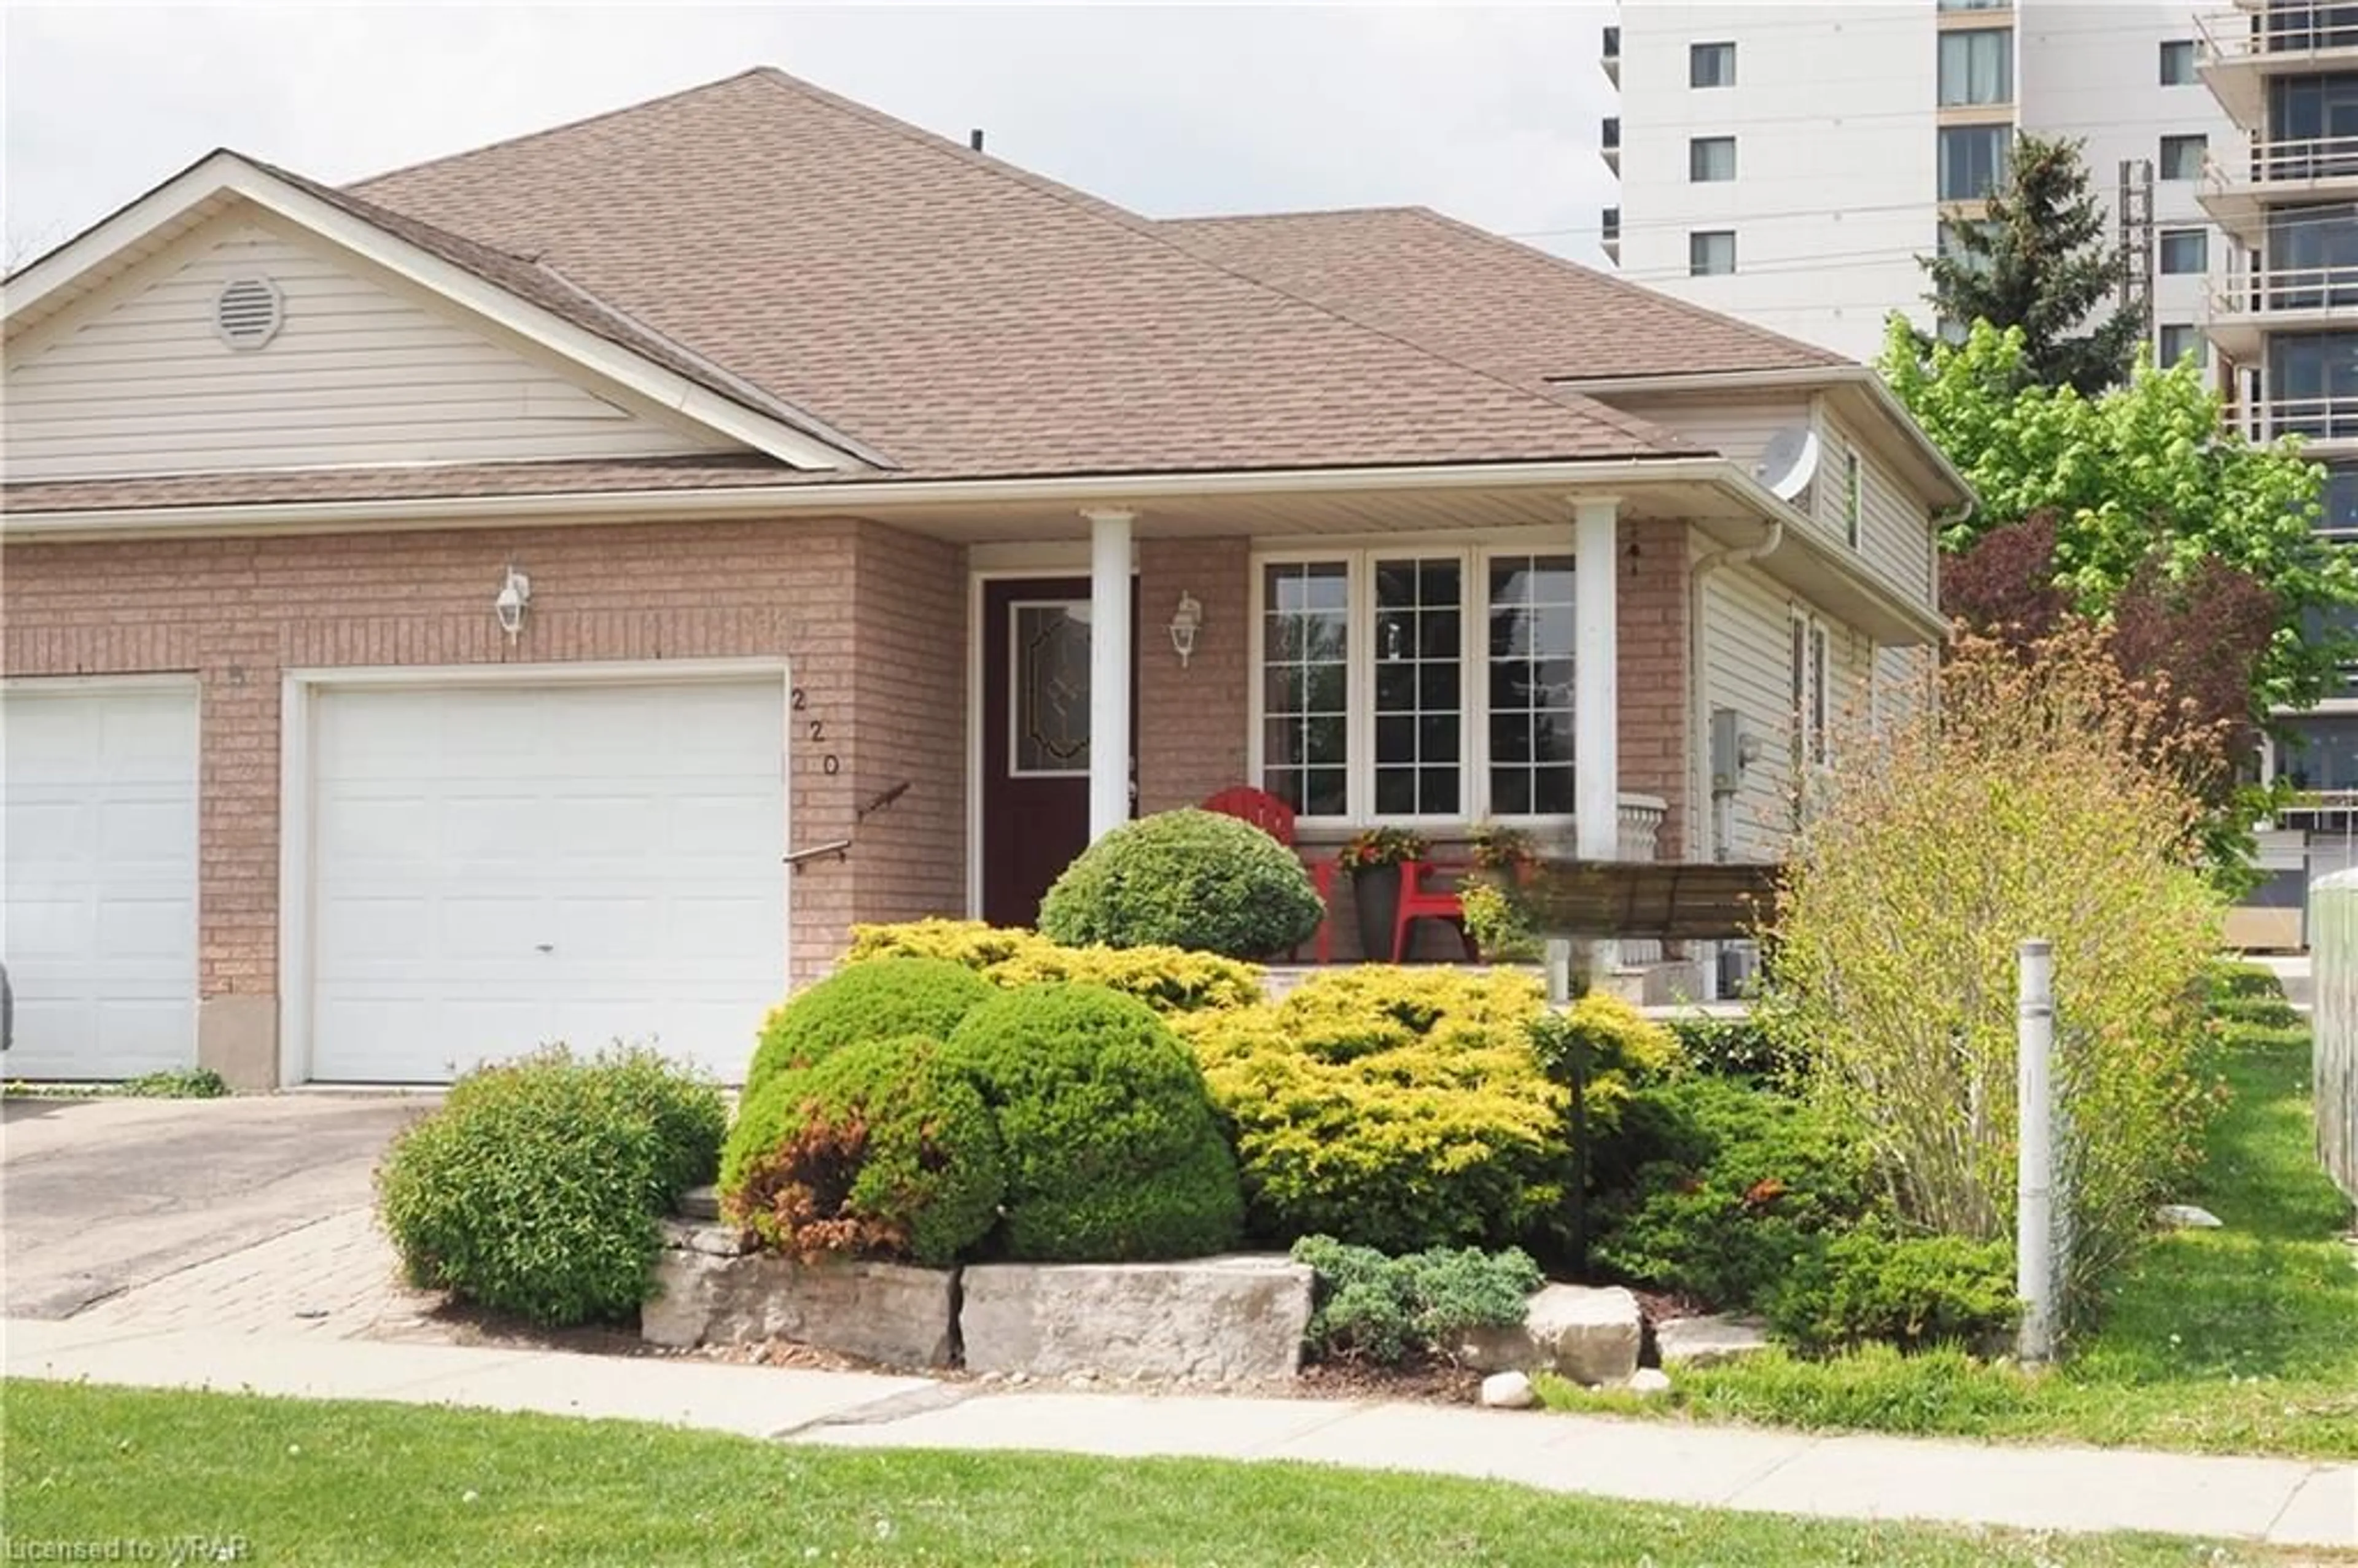 Frontside or backside of a home for 220 Newbury Dr, Kitchener Ontario N2N 2W9